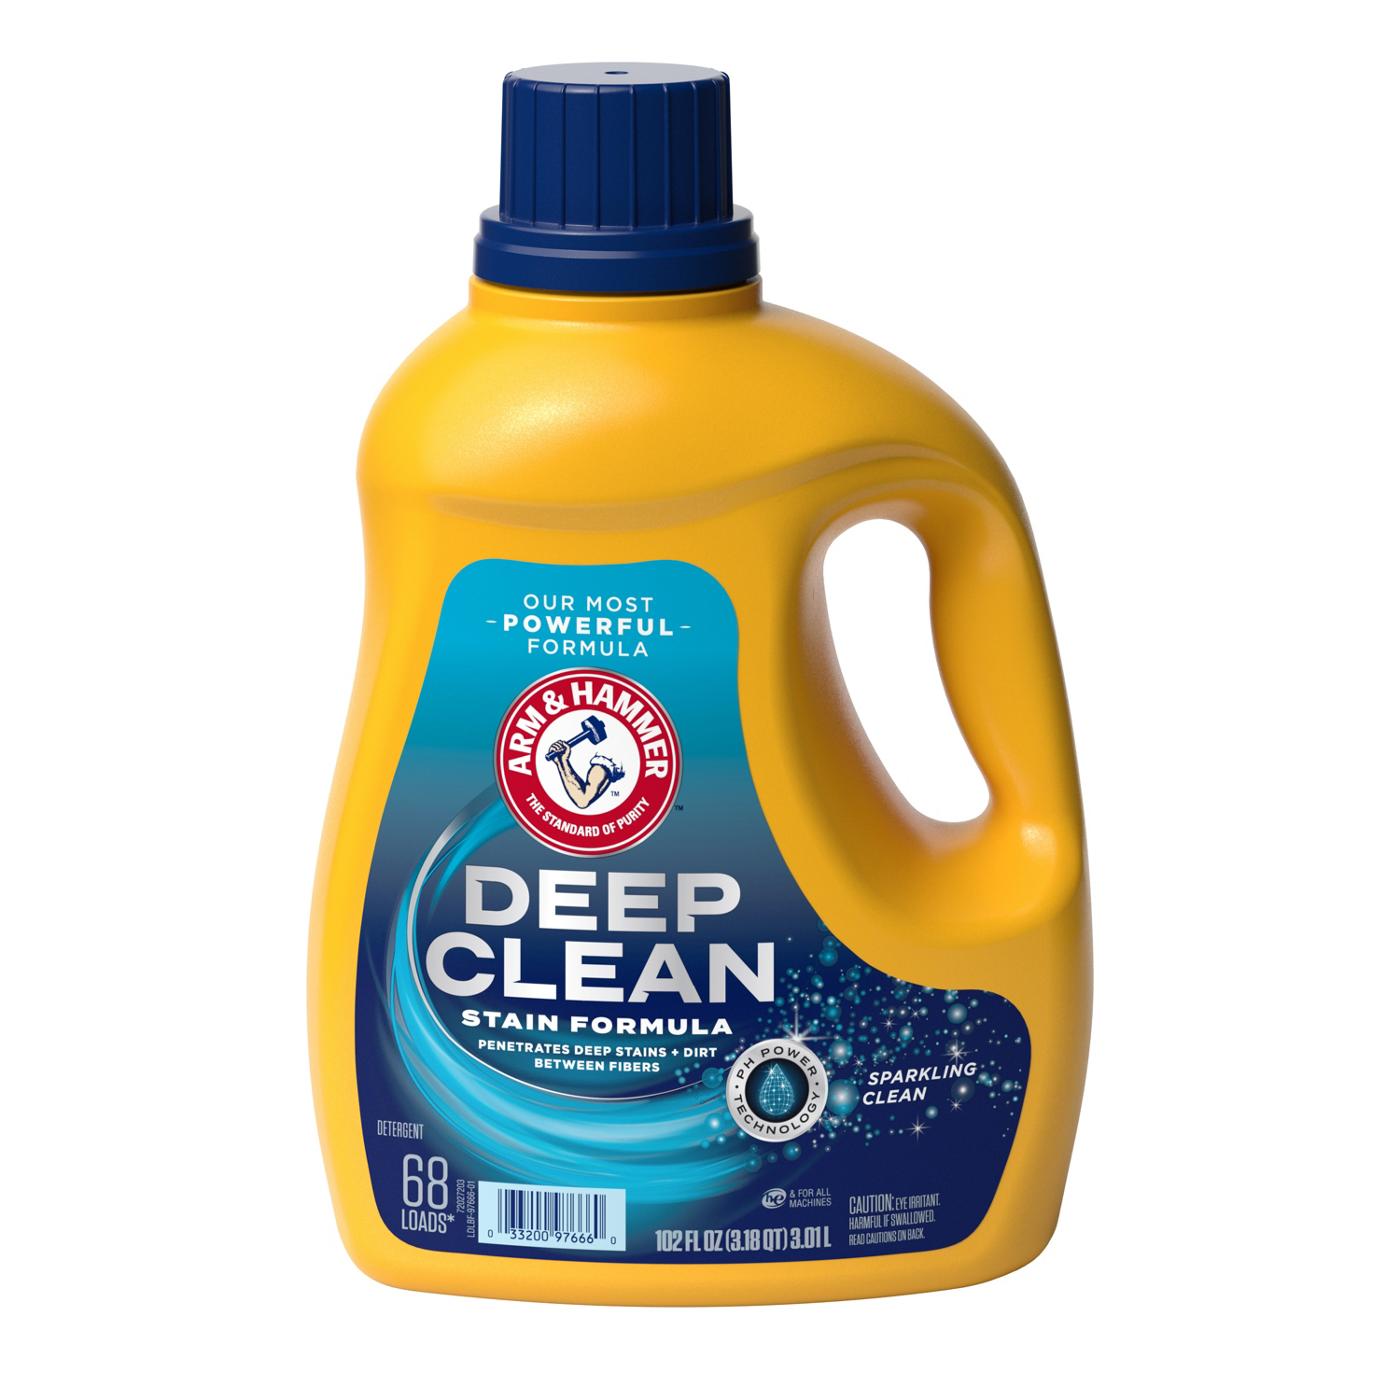 Arm & Hammer Deep Clean Stain HE Liquid Laundry Detergent, 68 Loads - Sparkling Clean; image 1 of 2